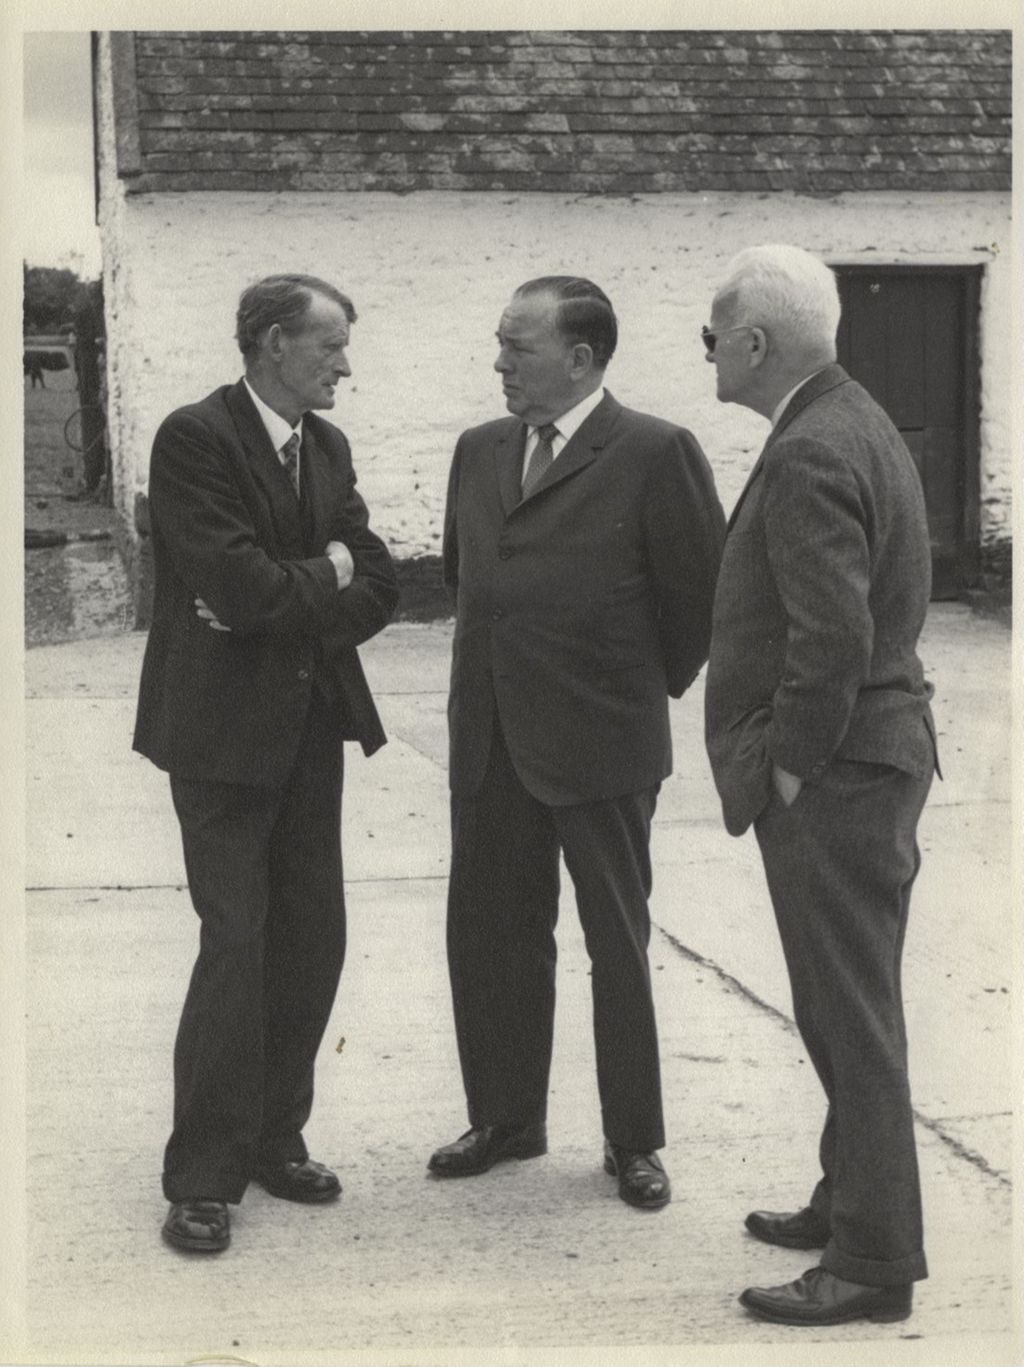 Miniature of Trip to Ireland, Richard J. Daley and Colonel Jack Reilly with a Kennedy relative